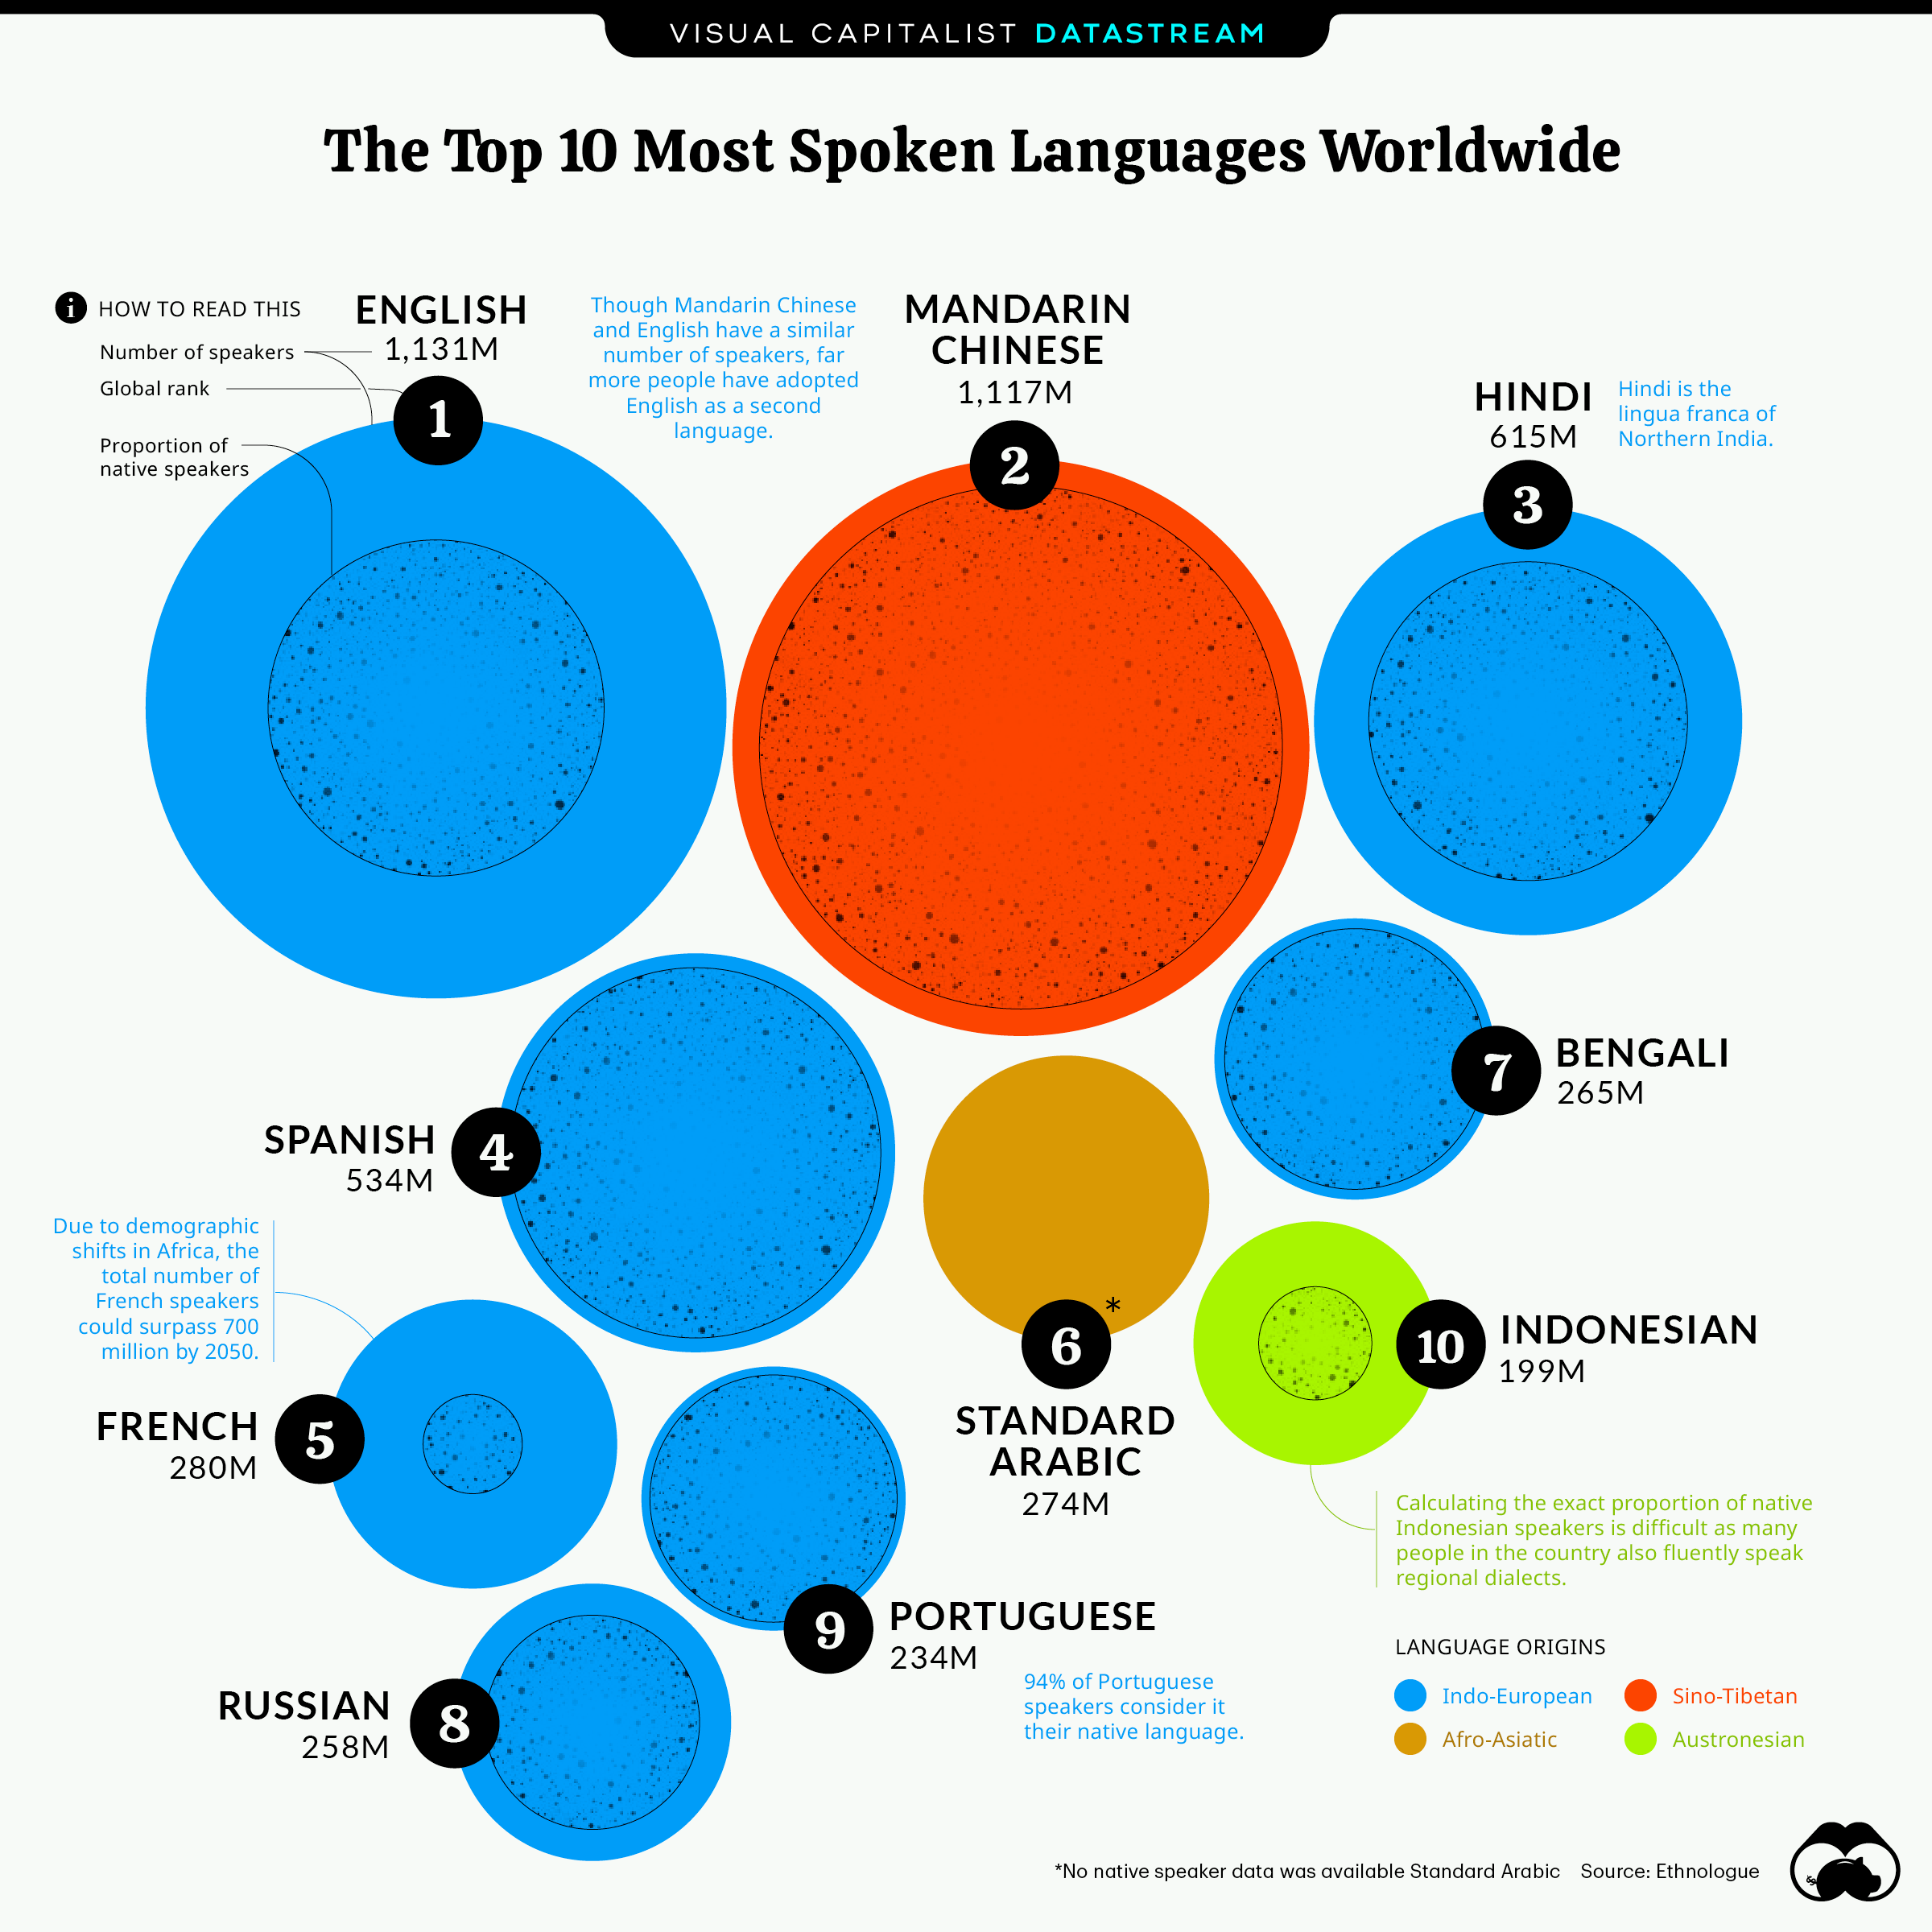 The World’s Top 10 Most Spoken Languages